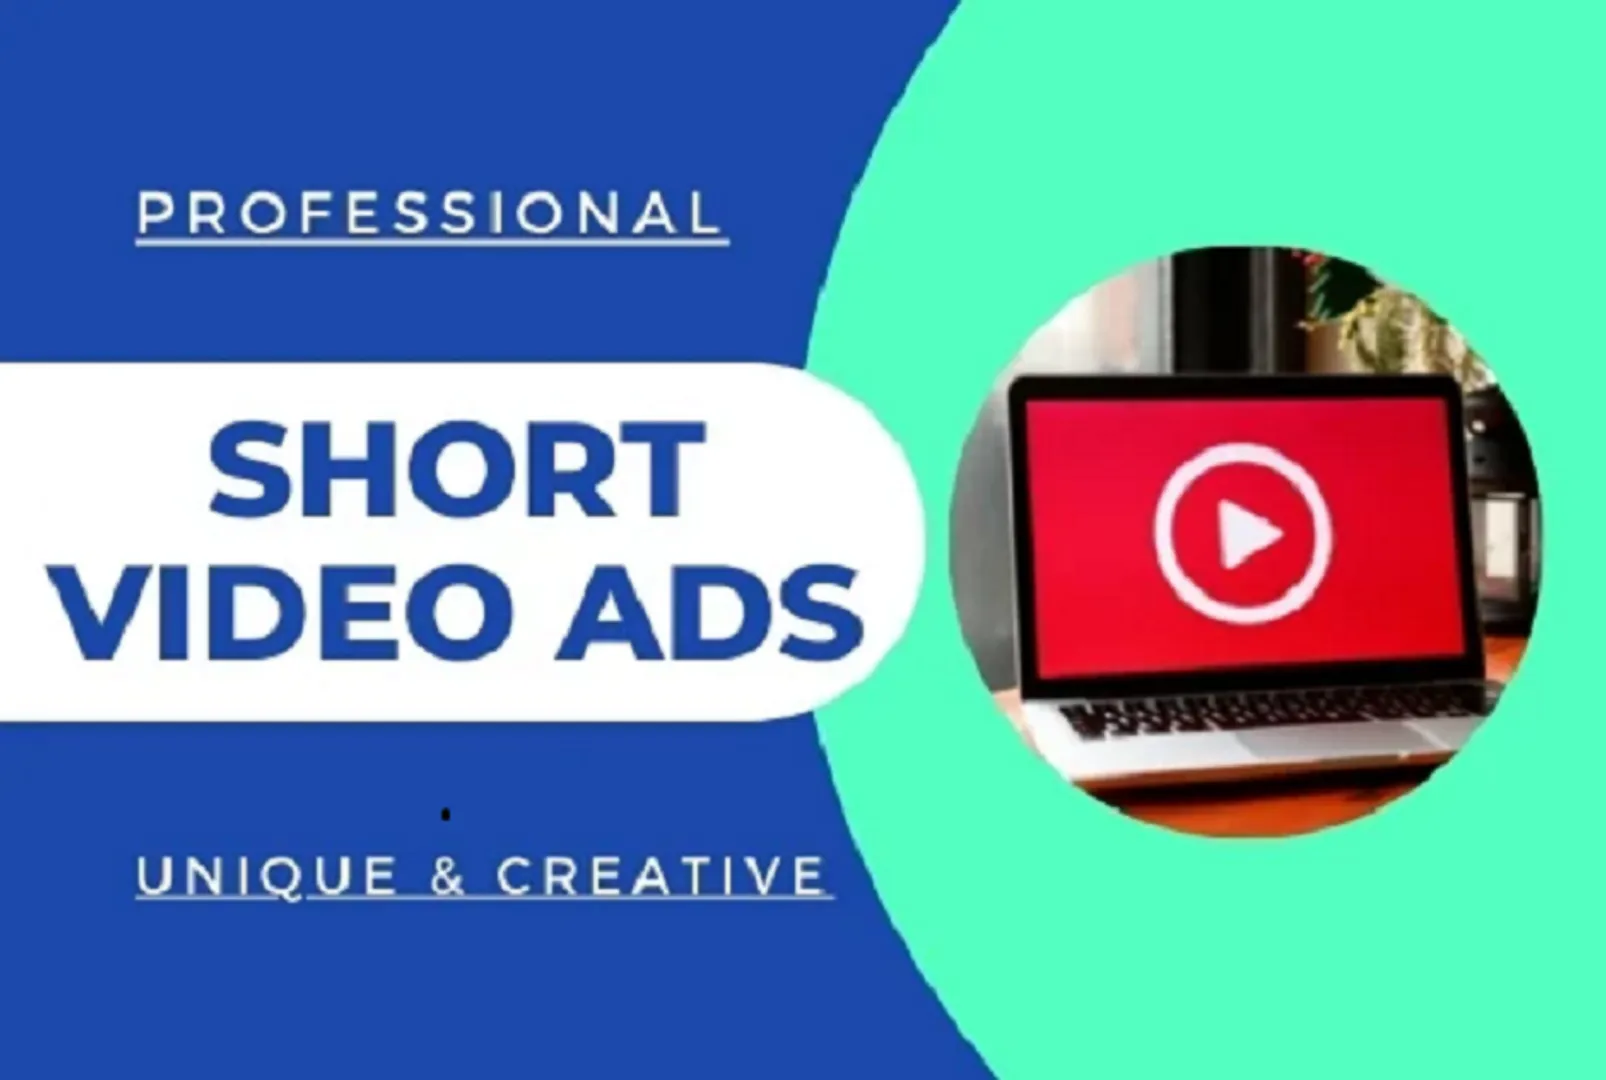 I will product commercial brand videos and advertising promo video for you . get in touch https://www.fiverr.com/s/Eav0Z0